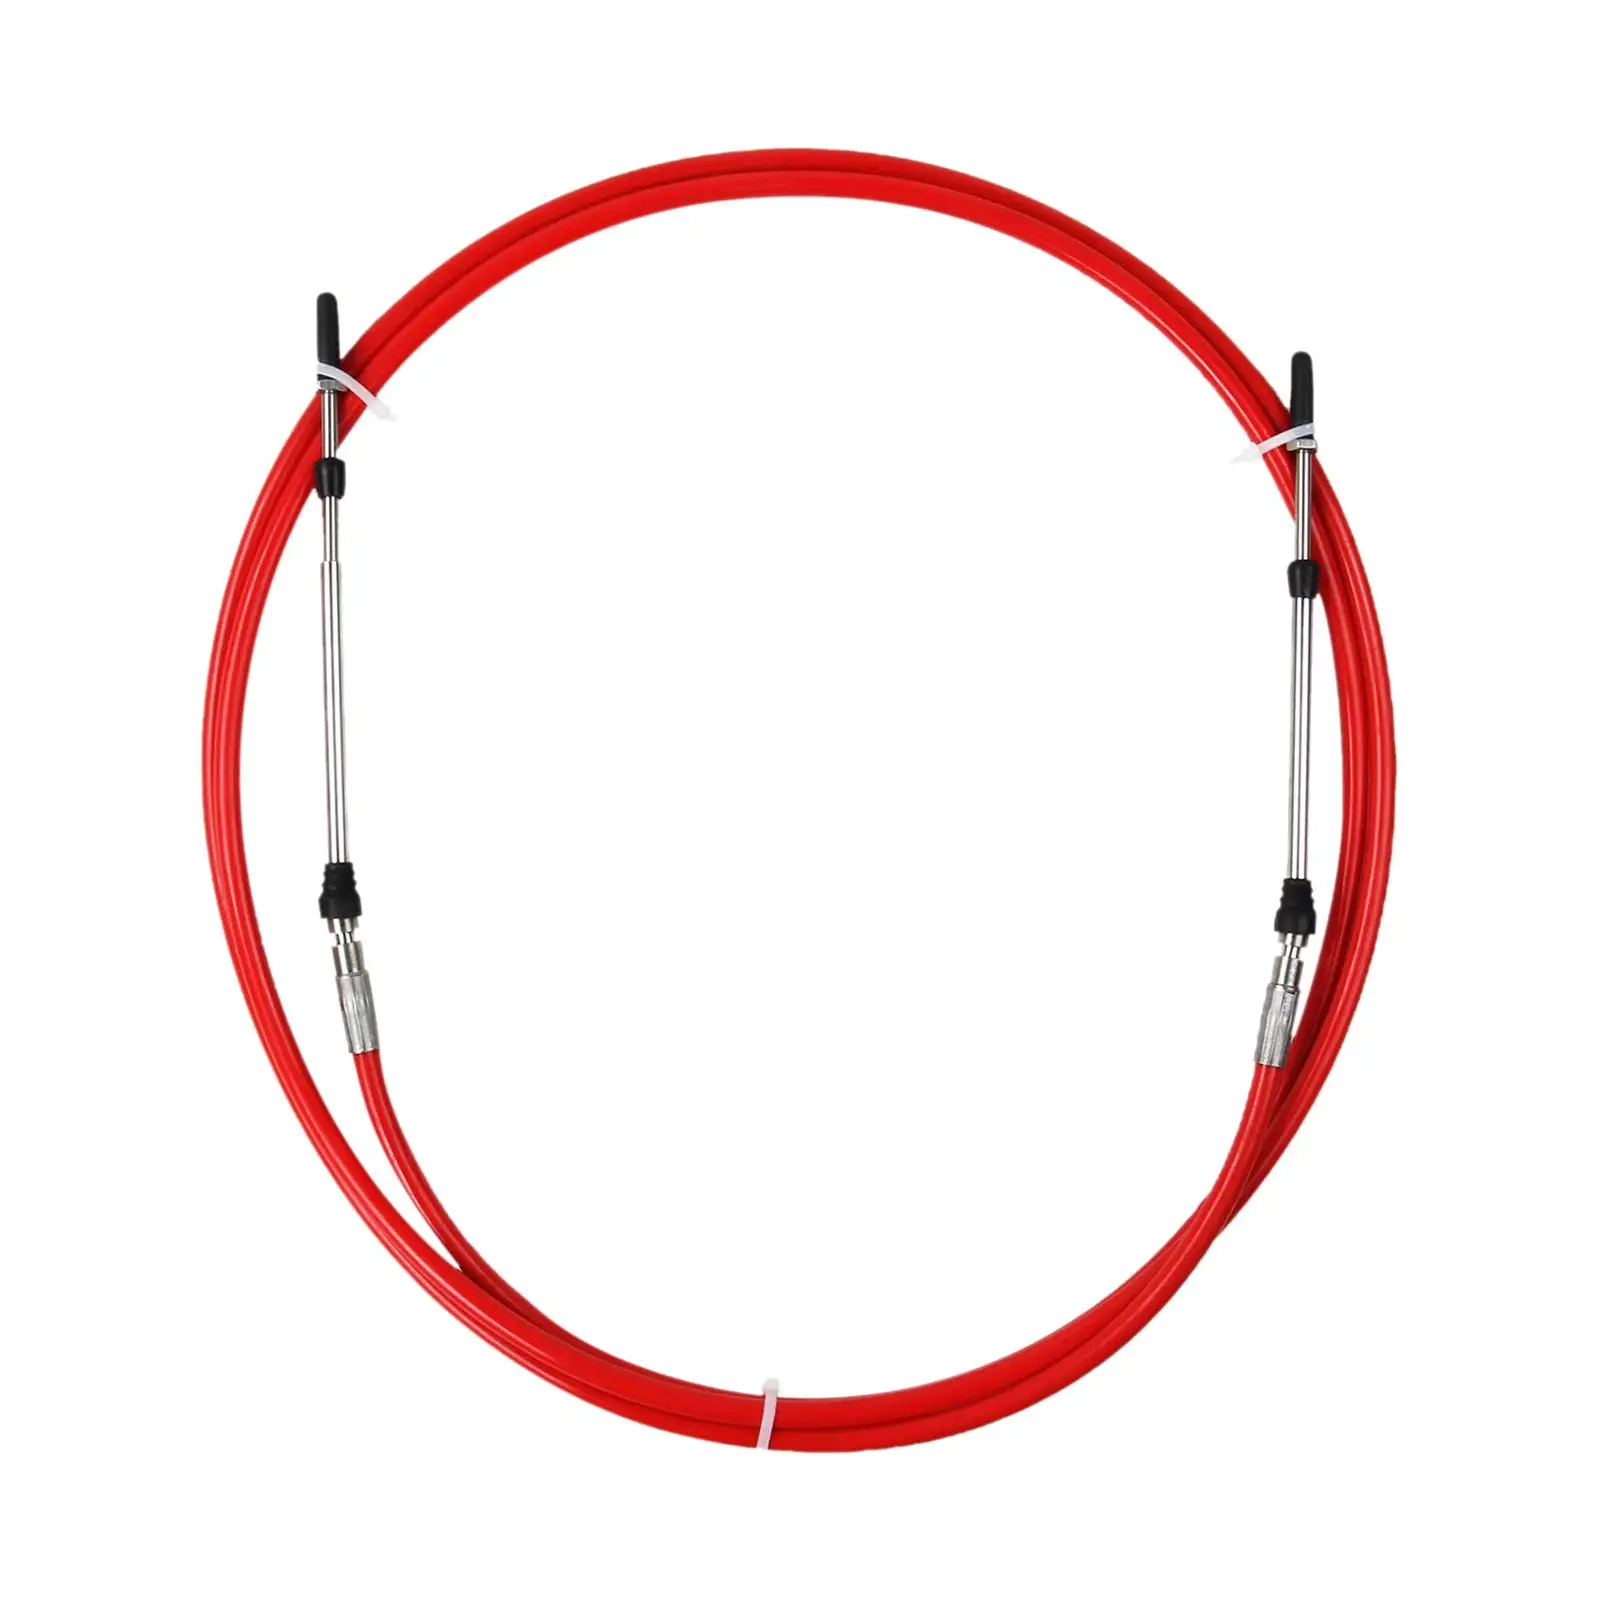 2x 15Ft Throttle Control Cable for  Outboard Stainless Steel Red/Black